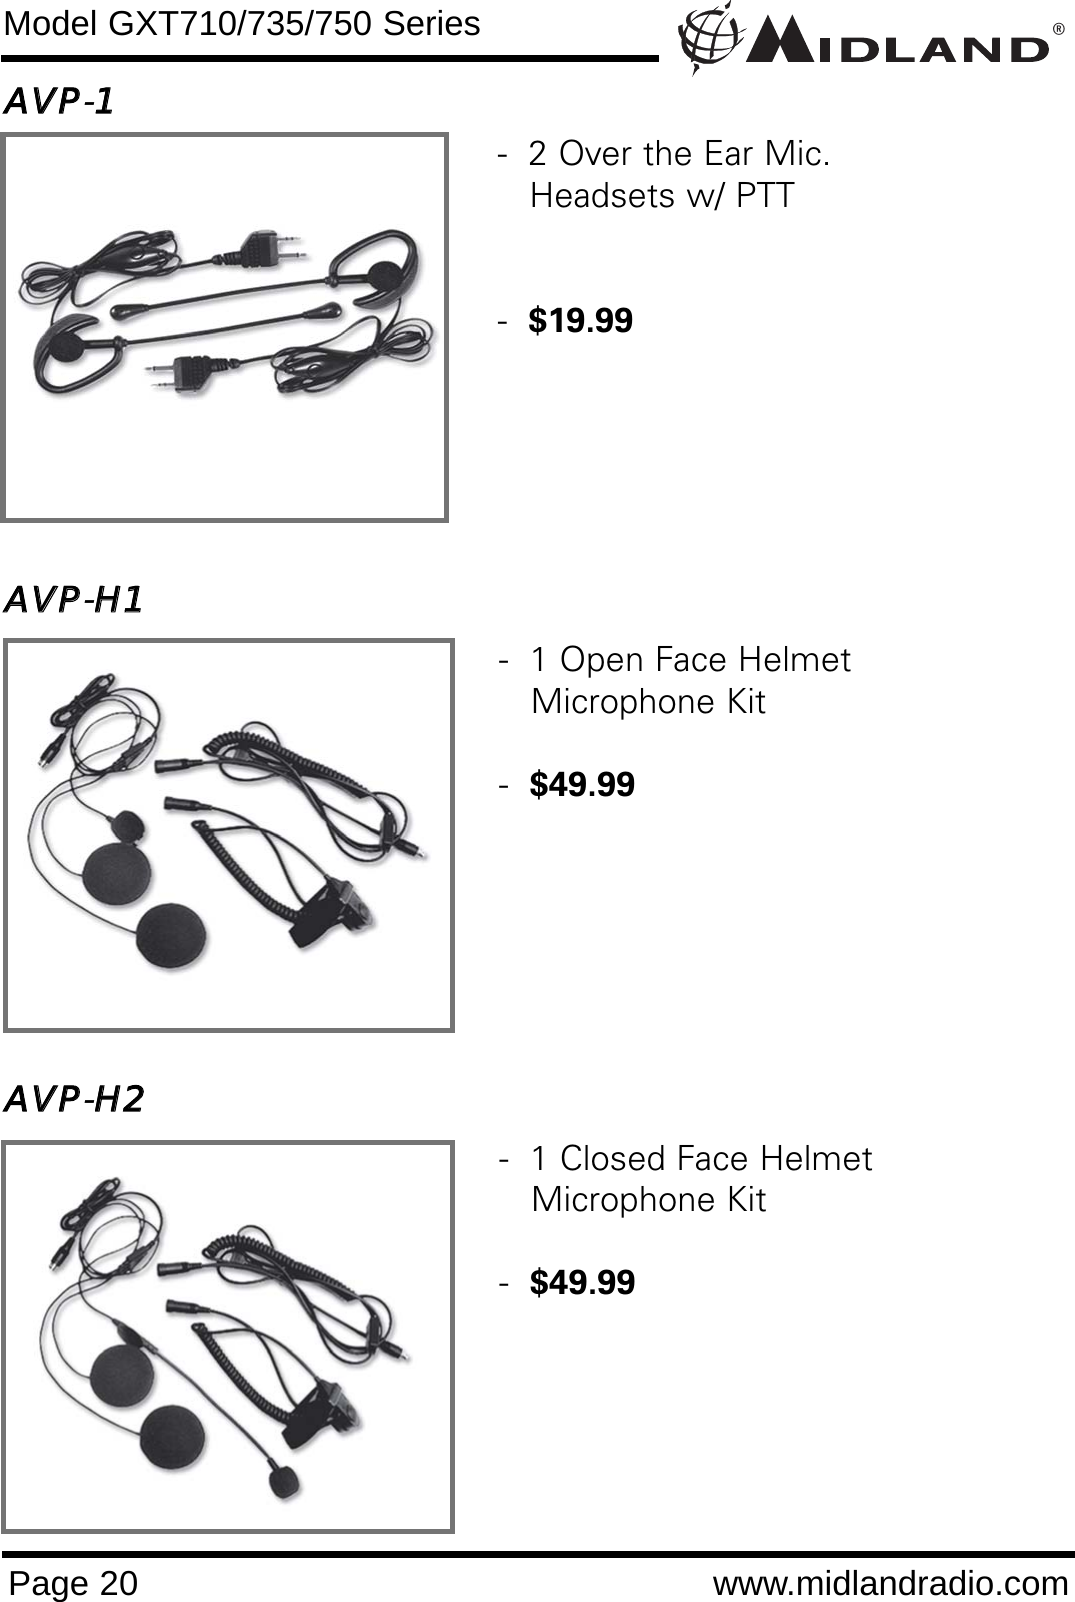 AAVVPP-11AAVVPP-HH11AAVVPP-HH22®Page 20 www.midlandradio.comModel GXT710/735/750 Series-  1 Open Face Helmet Microphone Kit-  $49.99-  1 Closed Face HelmetMicrophone Kit-  $49.99-  2 Over the Ear Mic. Headsets w/ PTT-  $19.99